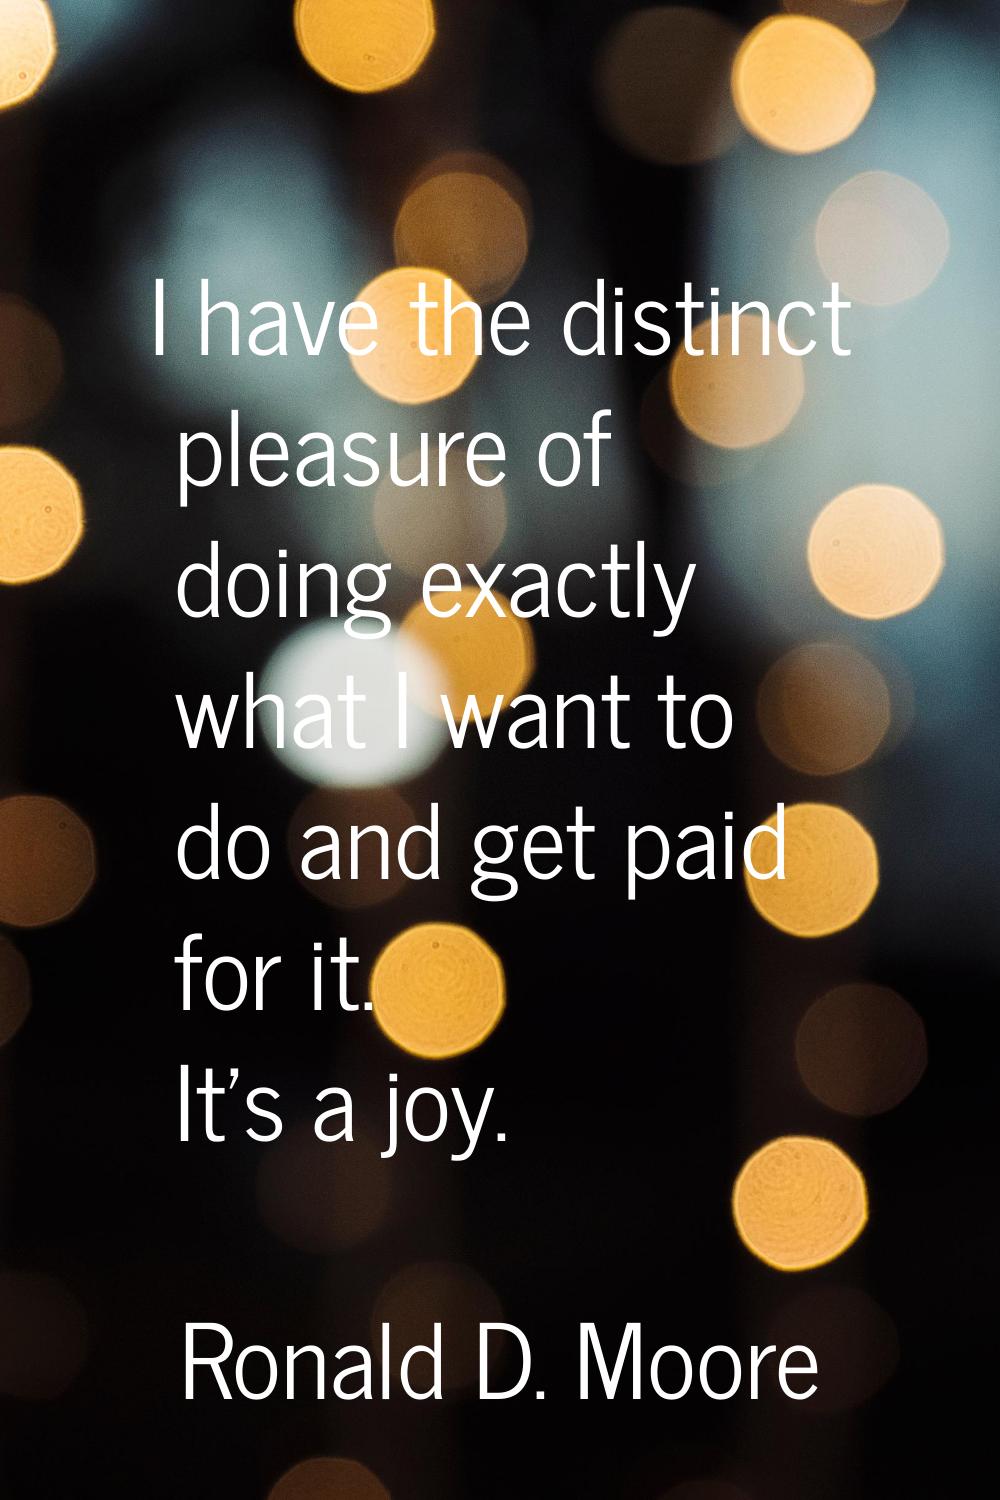 I have the distinct pleasure of doing exactly what I want to do and get paid for it. It's a joy.